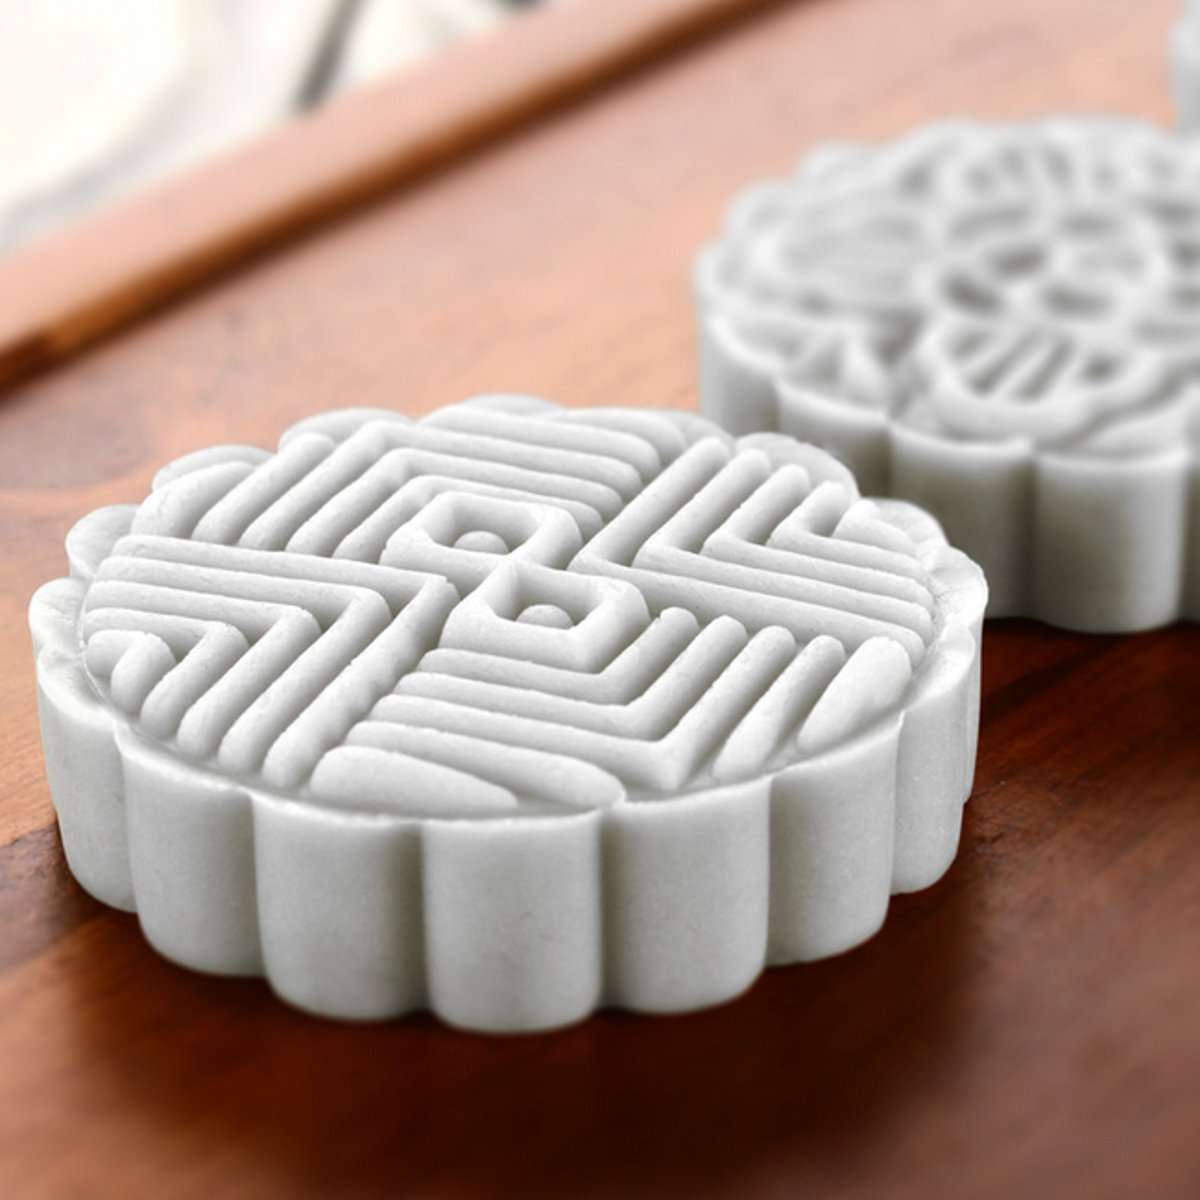 75g-8-Flower-Stamps-Moon-Cake-DIY-Mould-Hand-Pressure-Biscuit-Pastry-Mold-Baking-Tool-1373589